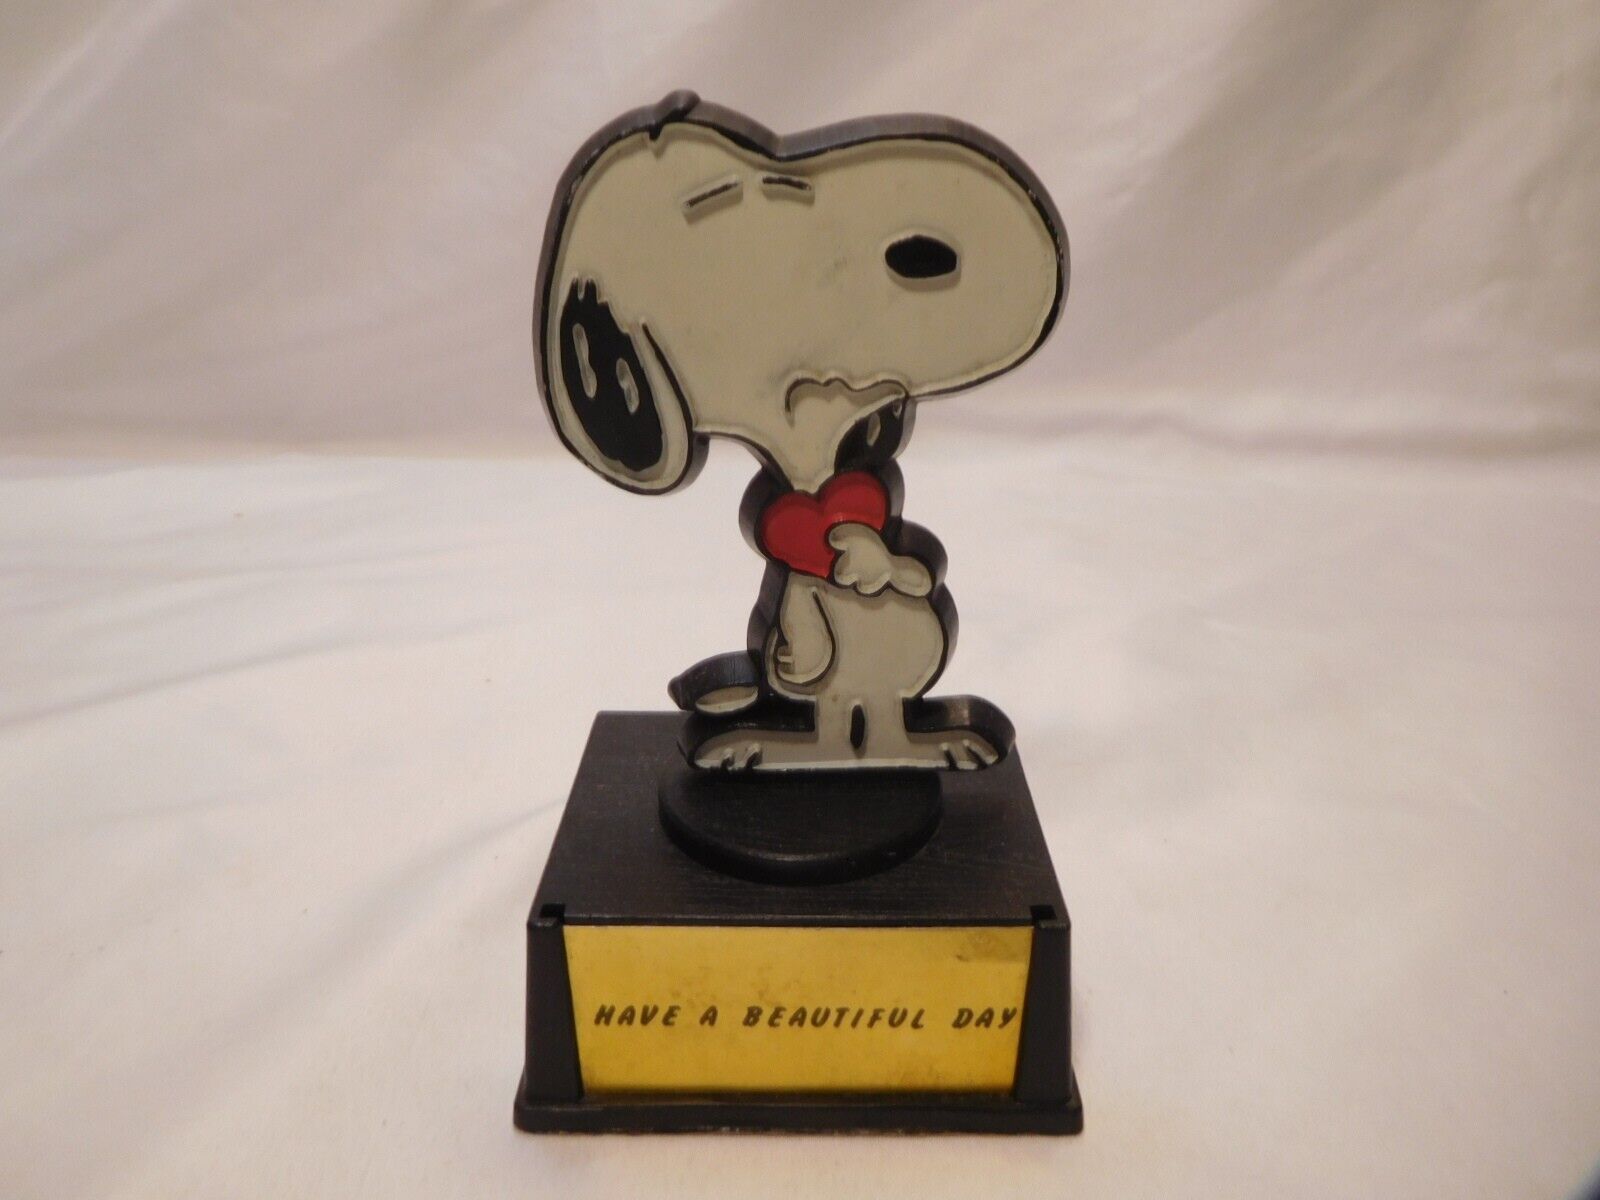 Peanuts Aviva Snoopy Gram Trophy Have A Beautiful Day Snoopy Holding Heart 1966